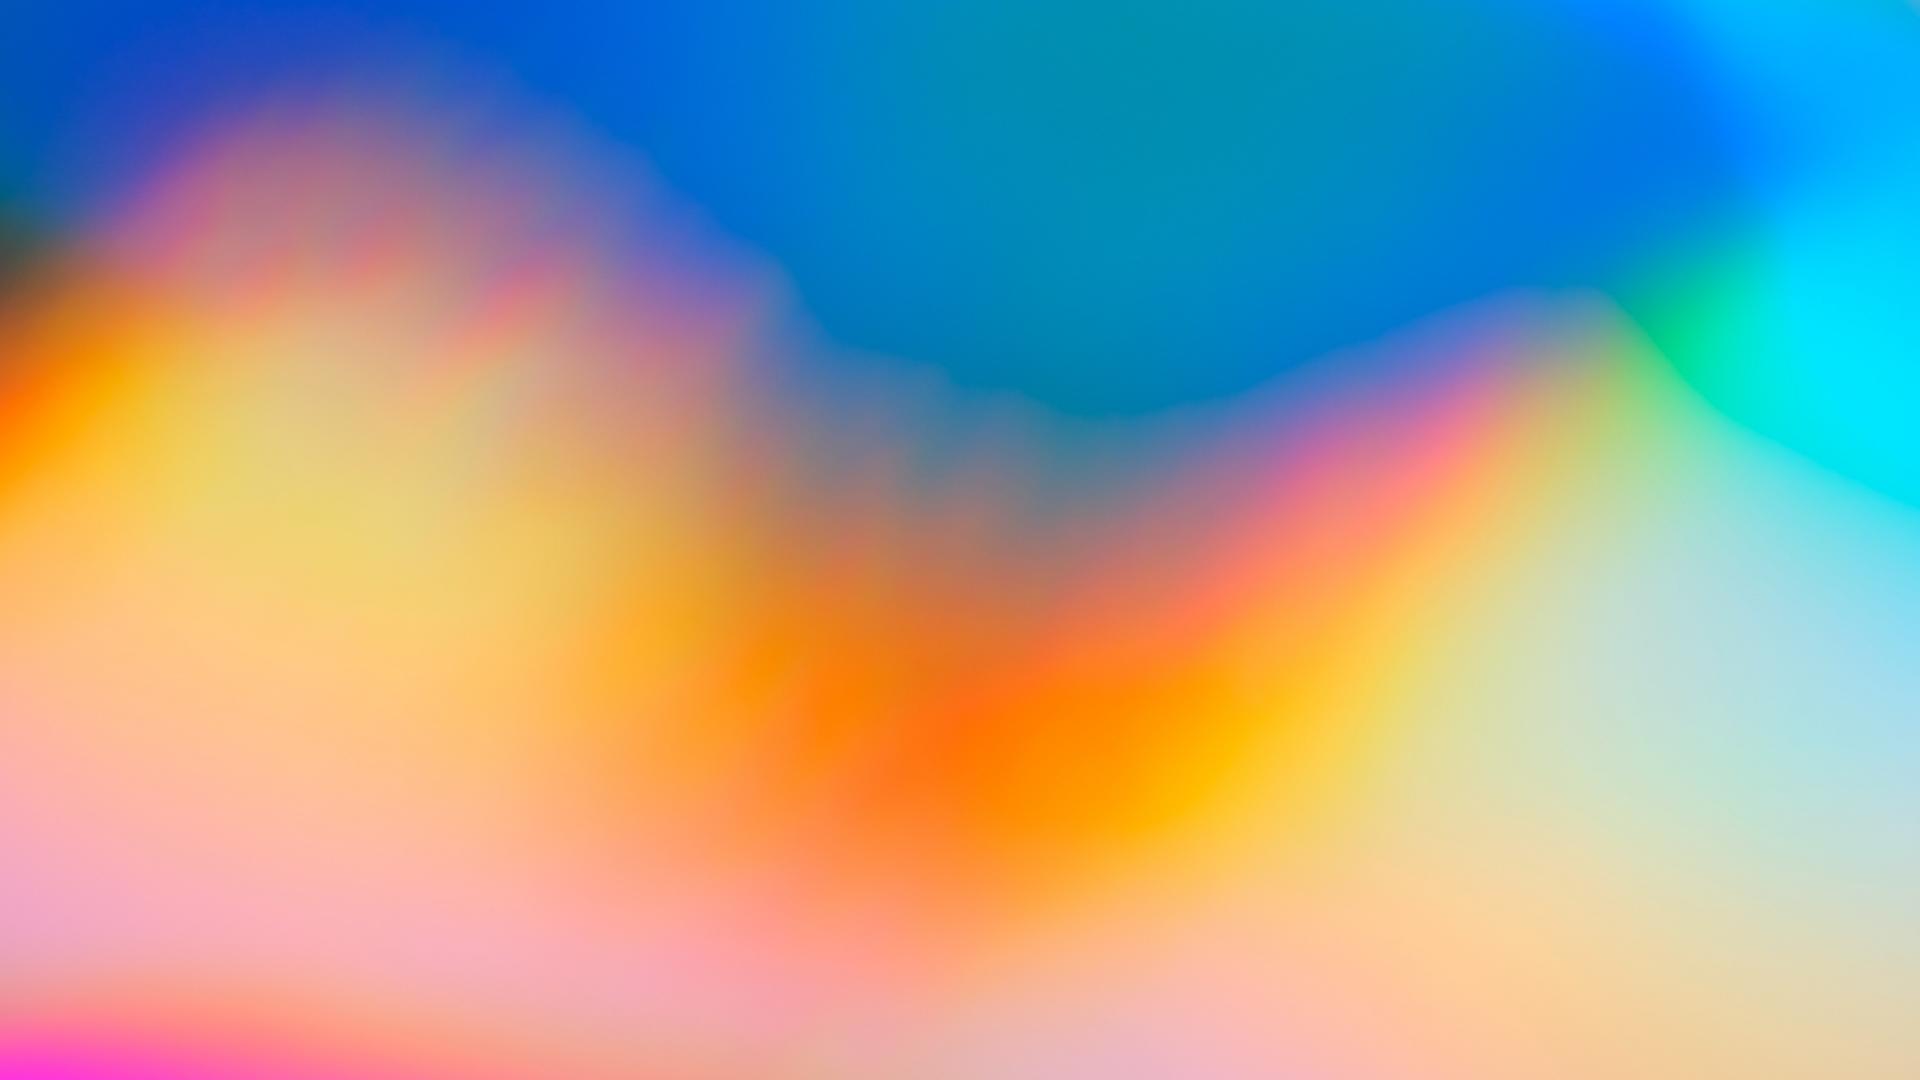 An abstract colourful image of blue, orange, pink and white